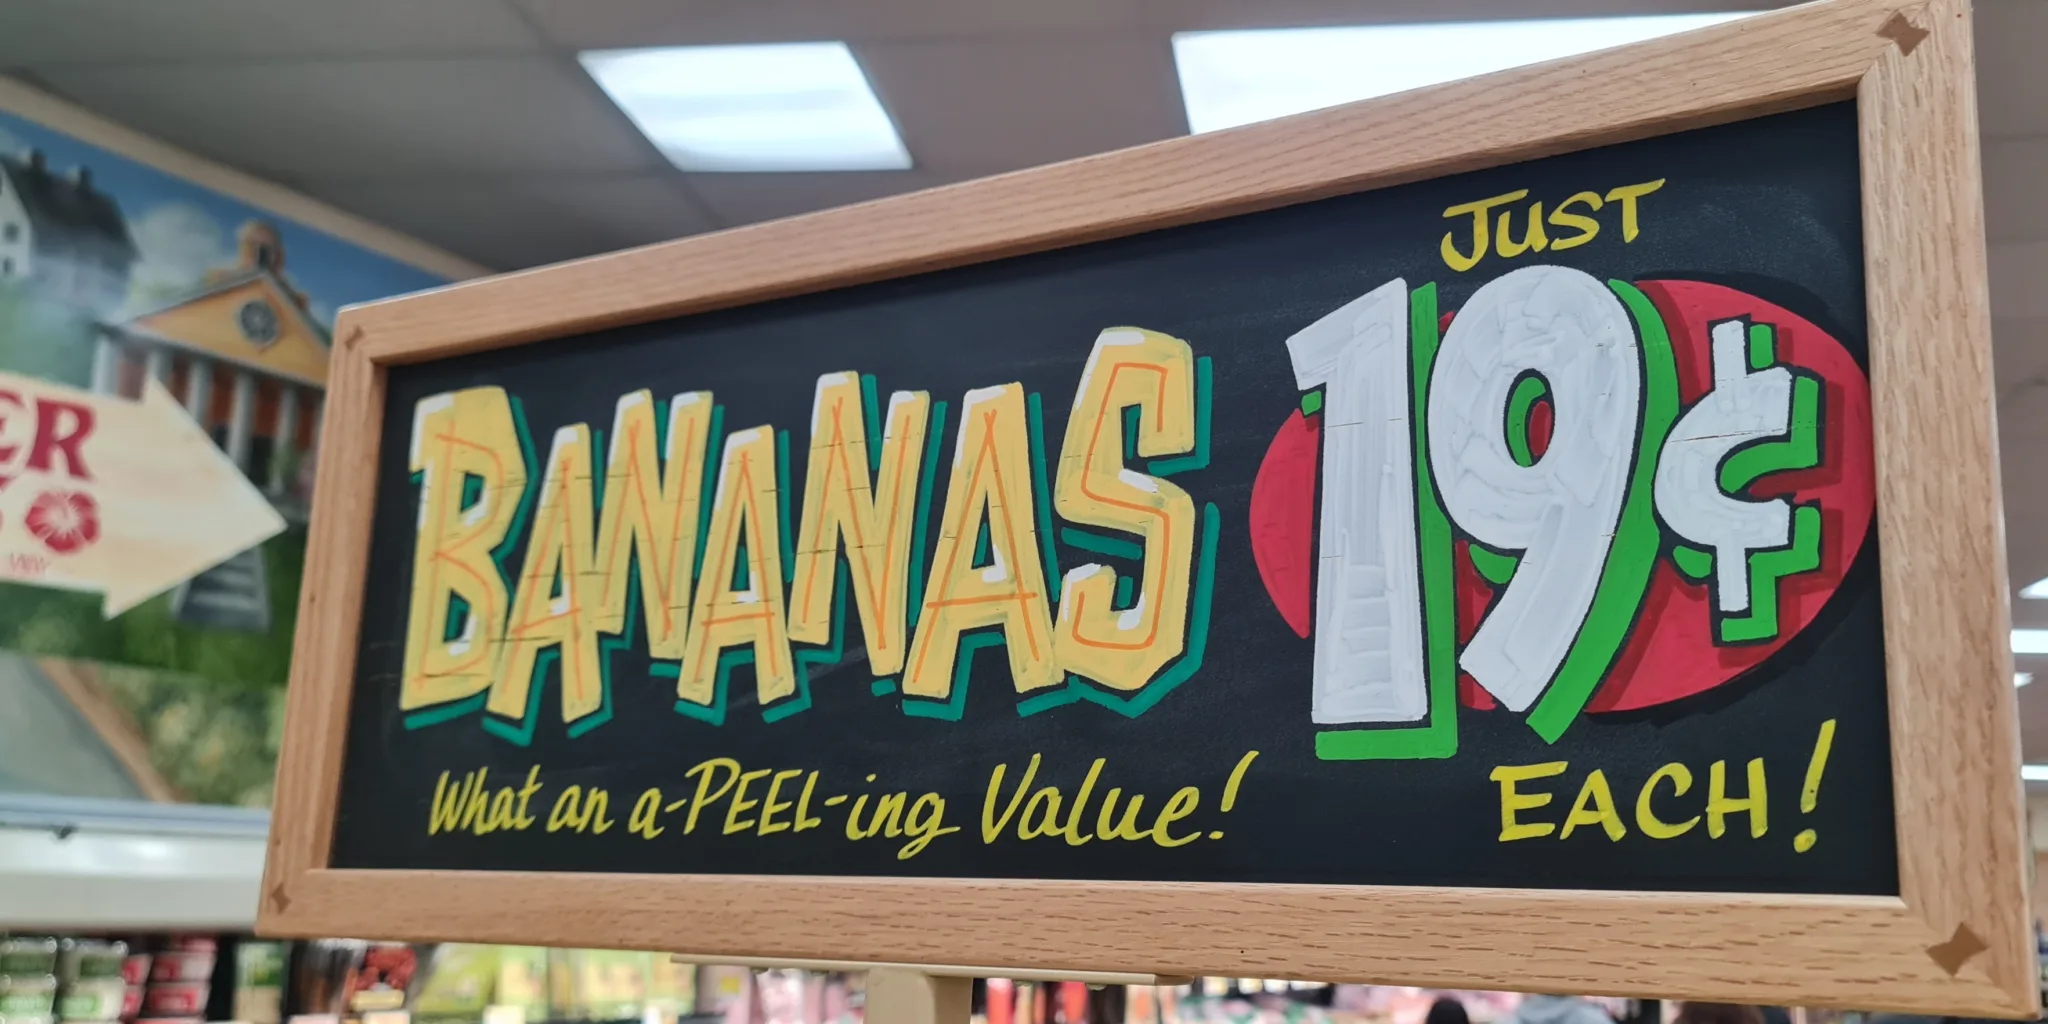 A chalkboard sign that says Bananas .19 cents each.